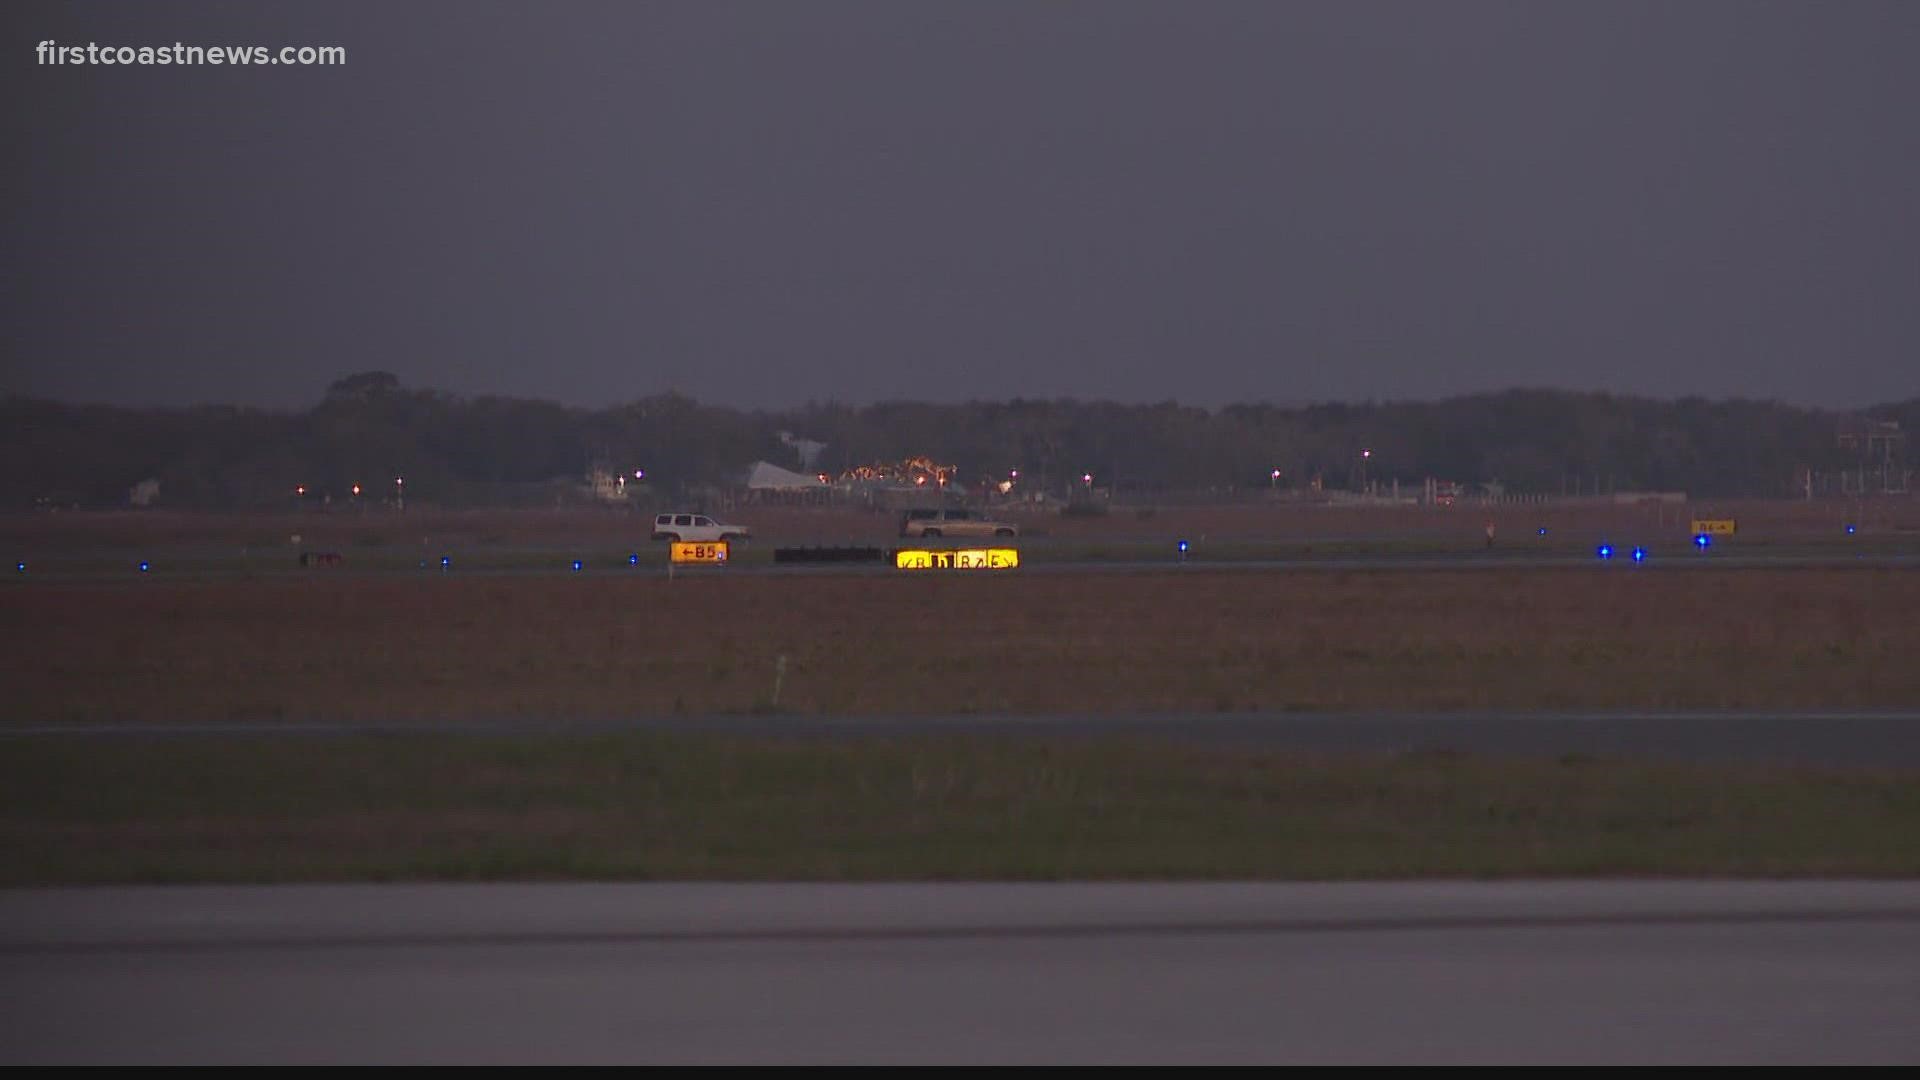 The incident happened at Northeast Florida Regional Airport in St. Augustine